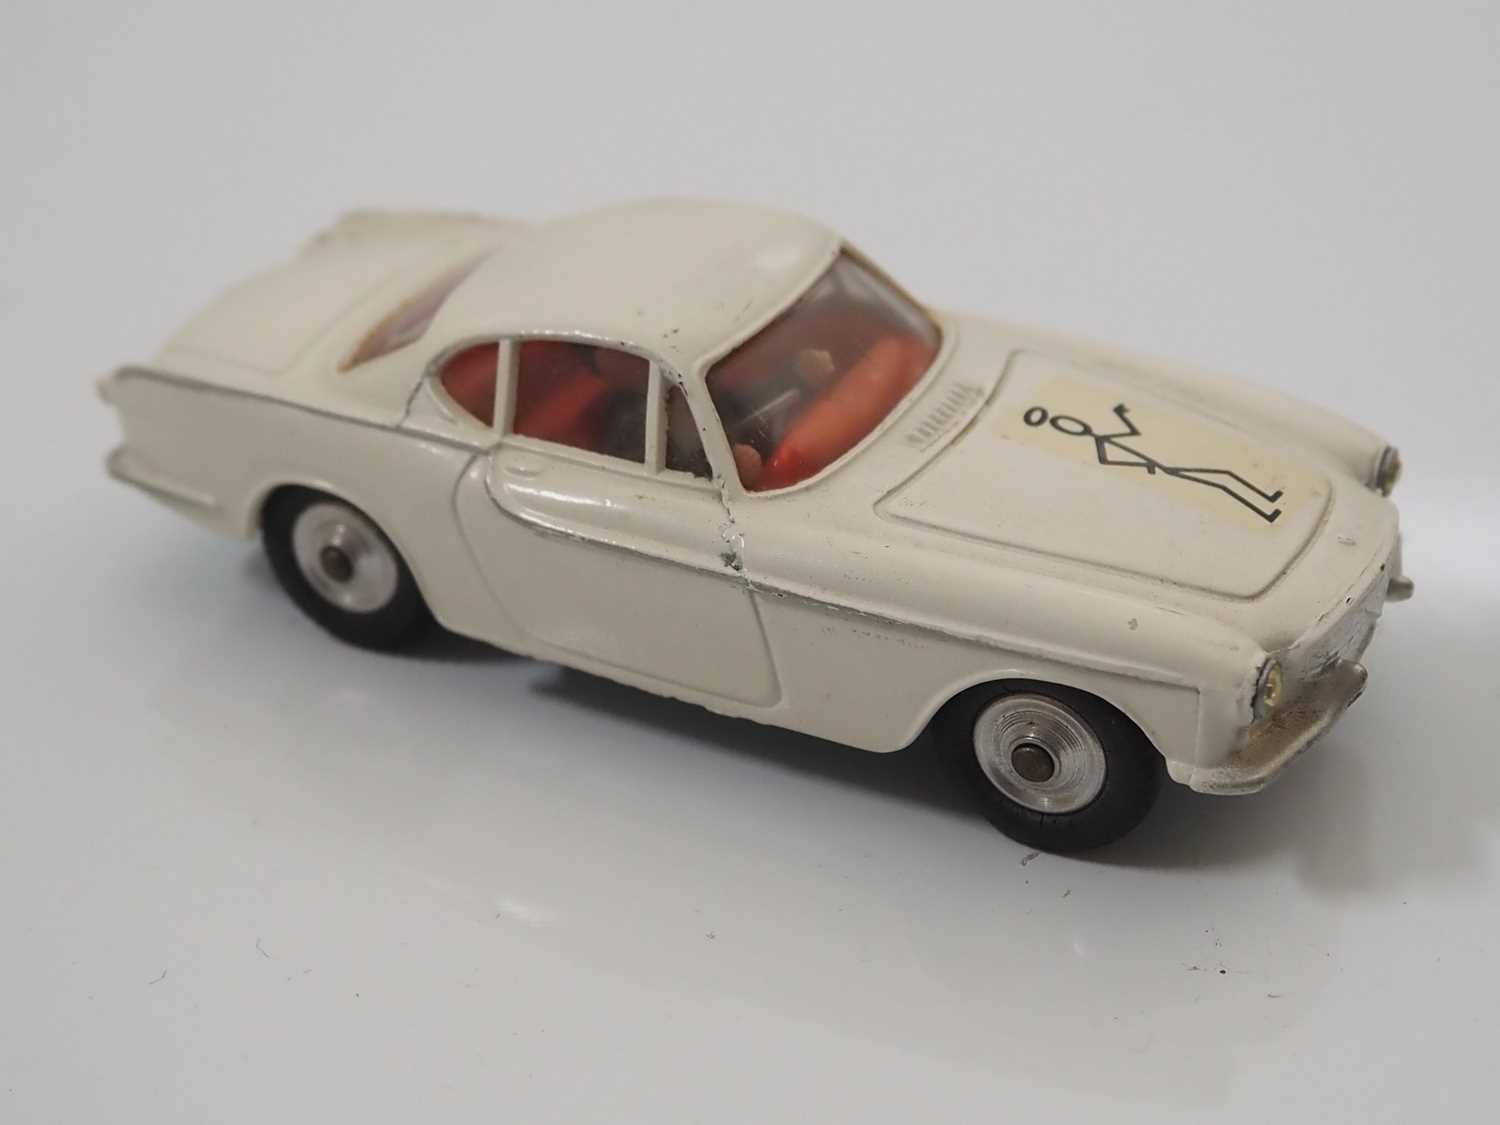 A CORGI 258 diecast 'The Saint's' Volvo P1800 with white body, red interior with figure, silver - Image 3 of 5